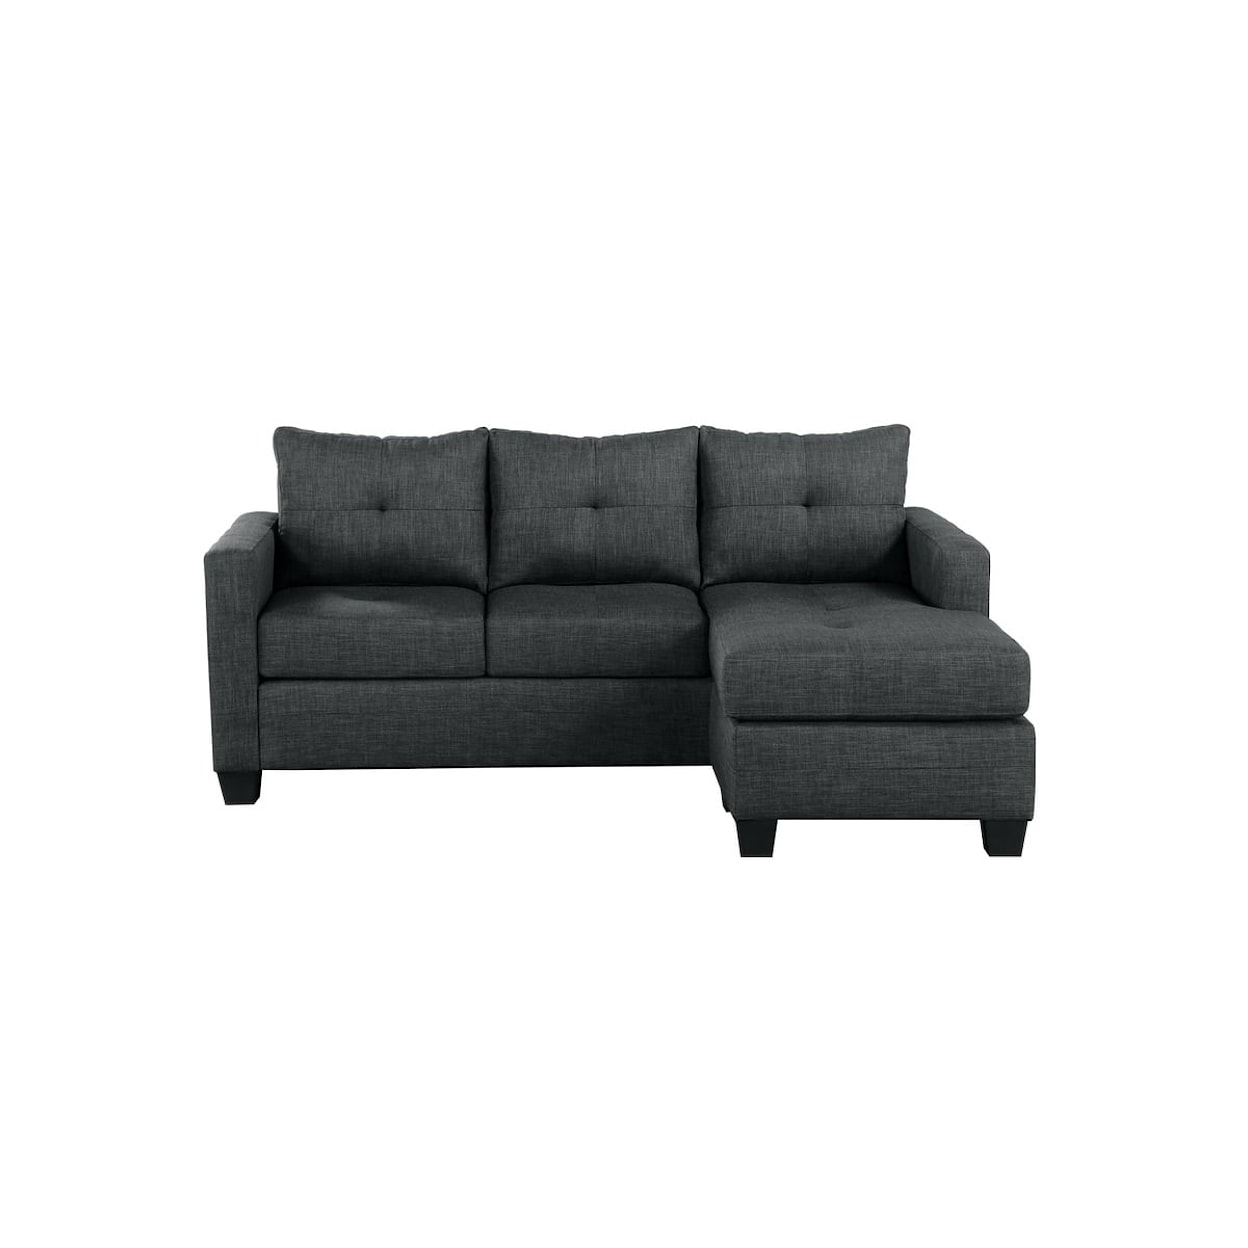 Homelegance Furniture Homelegance 2-Piece Reversible Sofa Chaise with Ottoman